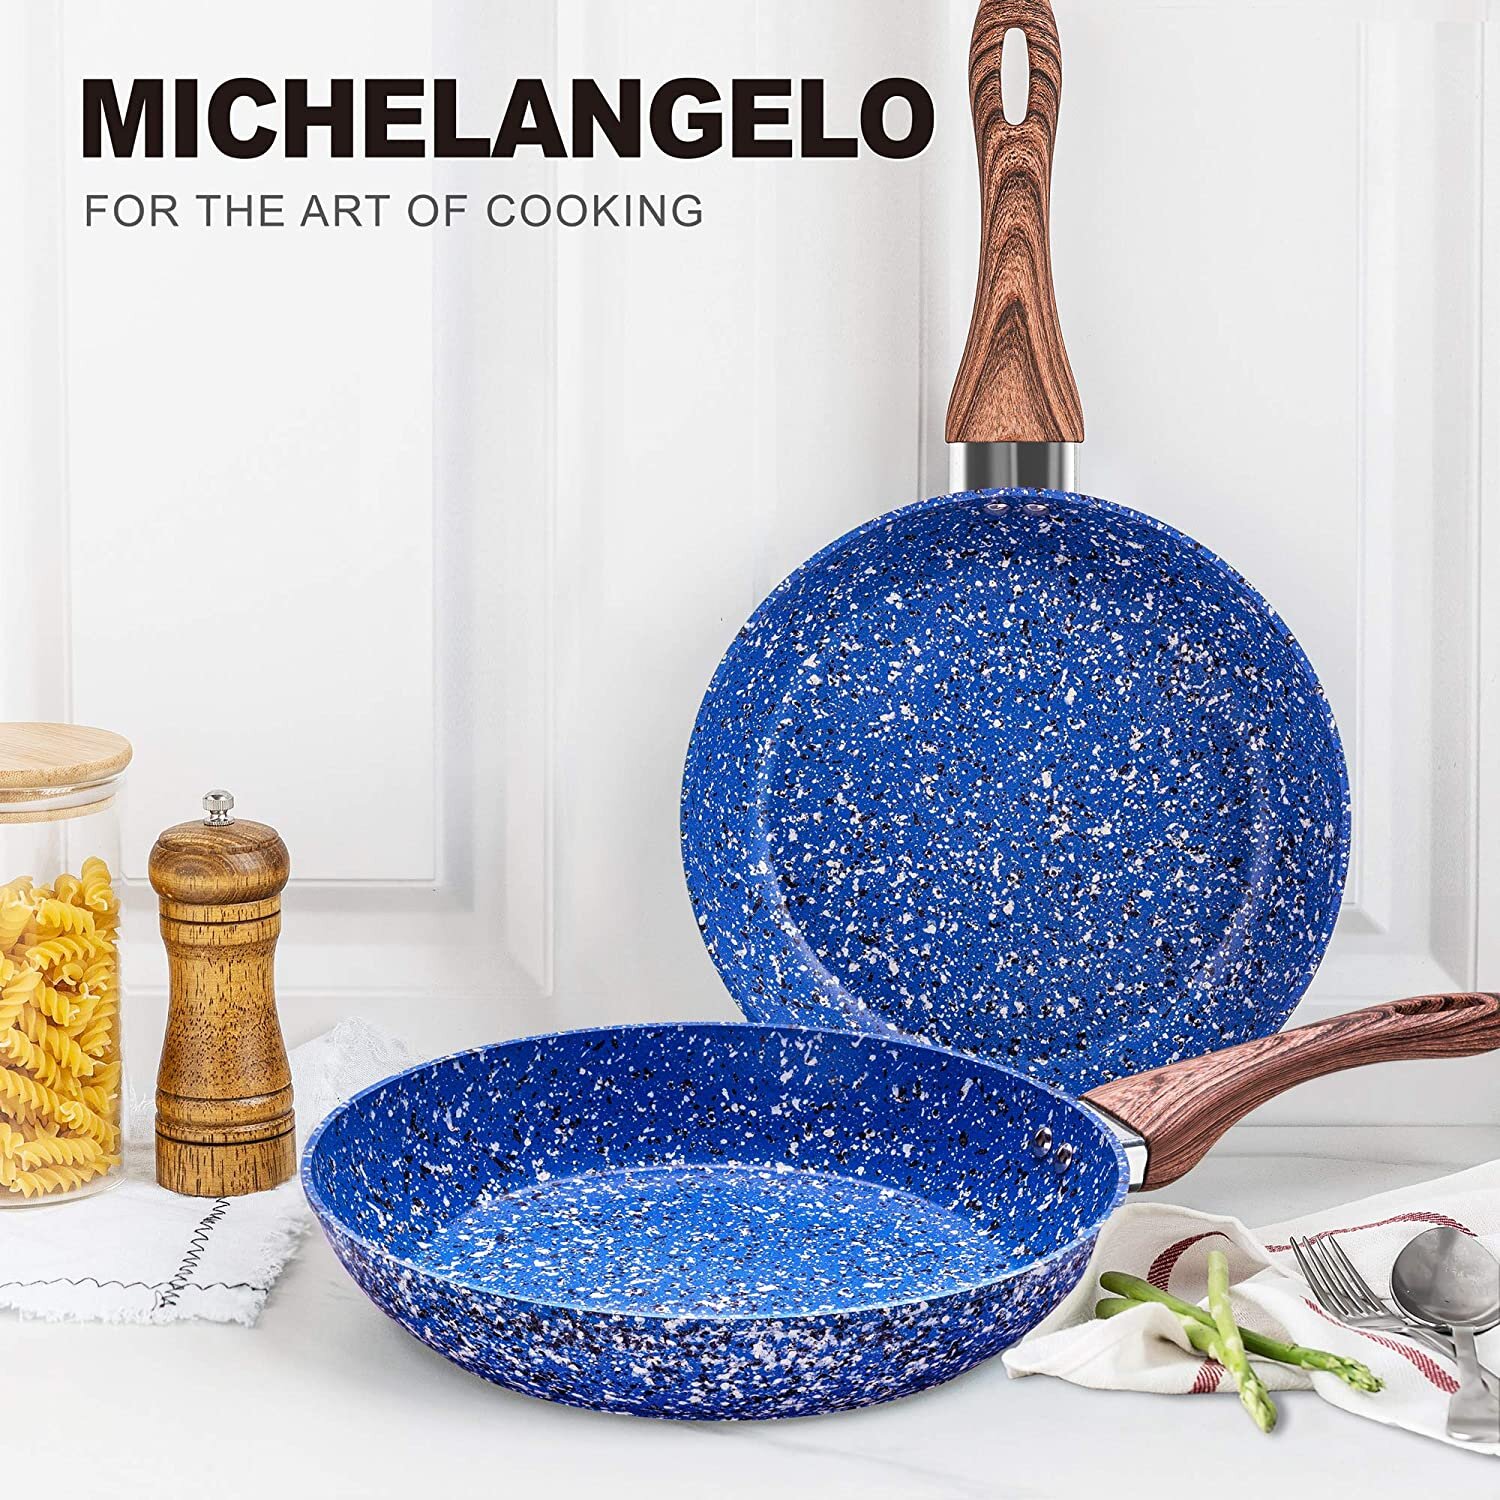 MICHELANGELO Pots and Pans Set Nonstick, Granite Non Stick Pots and Pan Set  8 Pcs, Non Toxic Pan Sets for Cooking Nonstick Cookware Set Induction